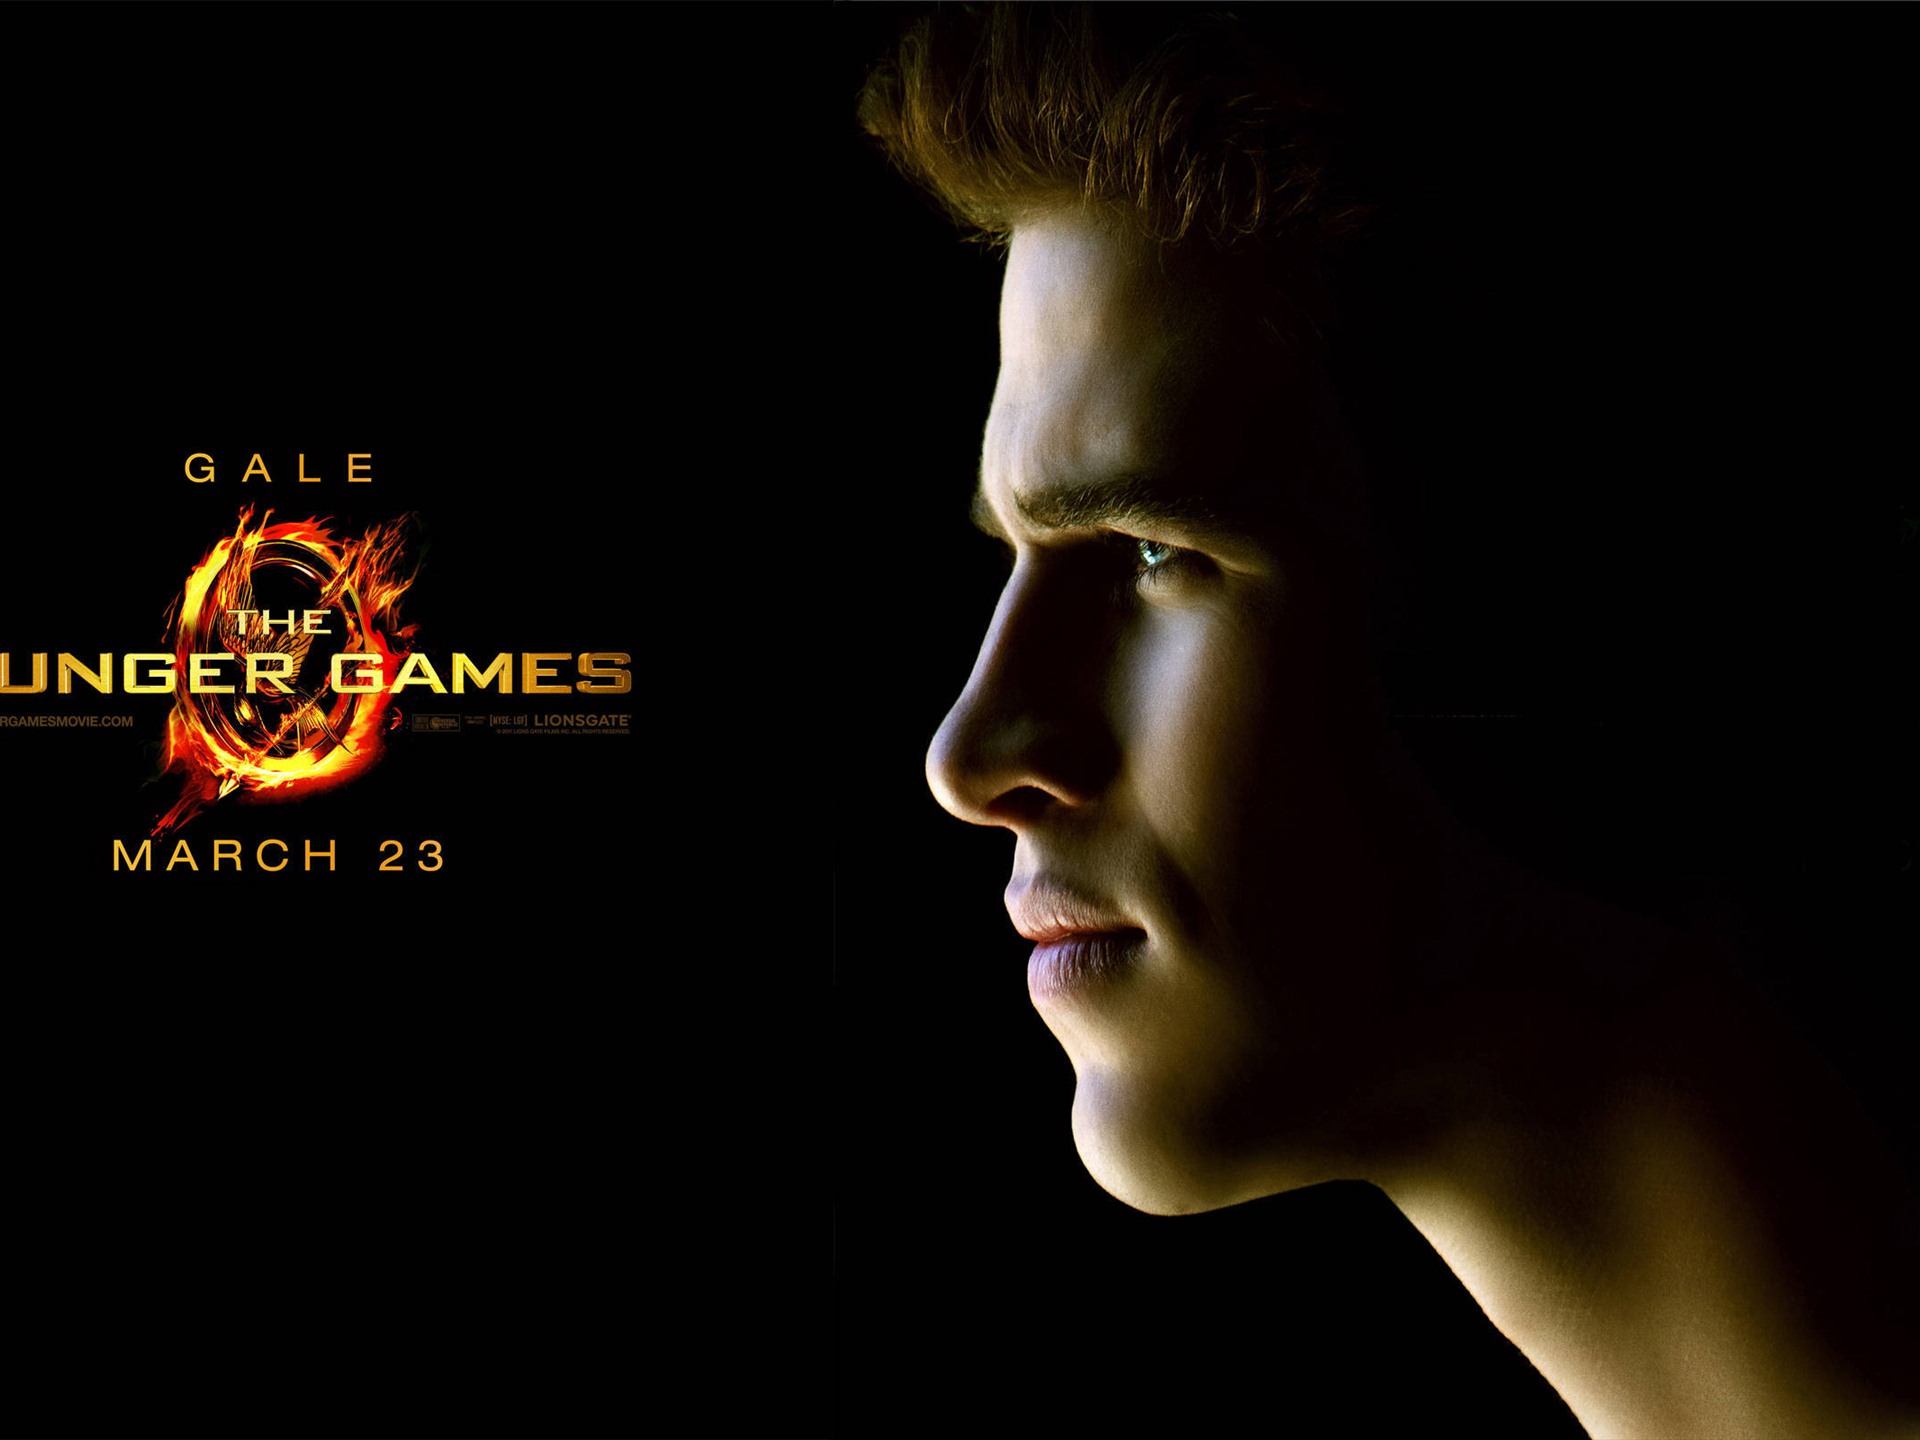 The Hunger Games HD wallpapers #4 - 1920x1440